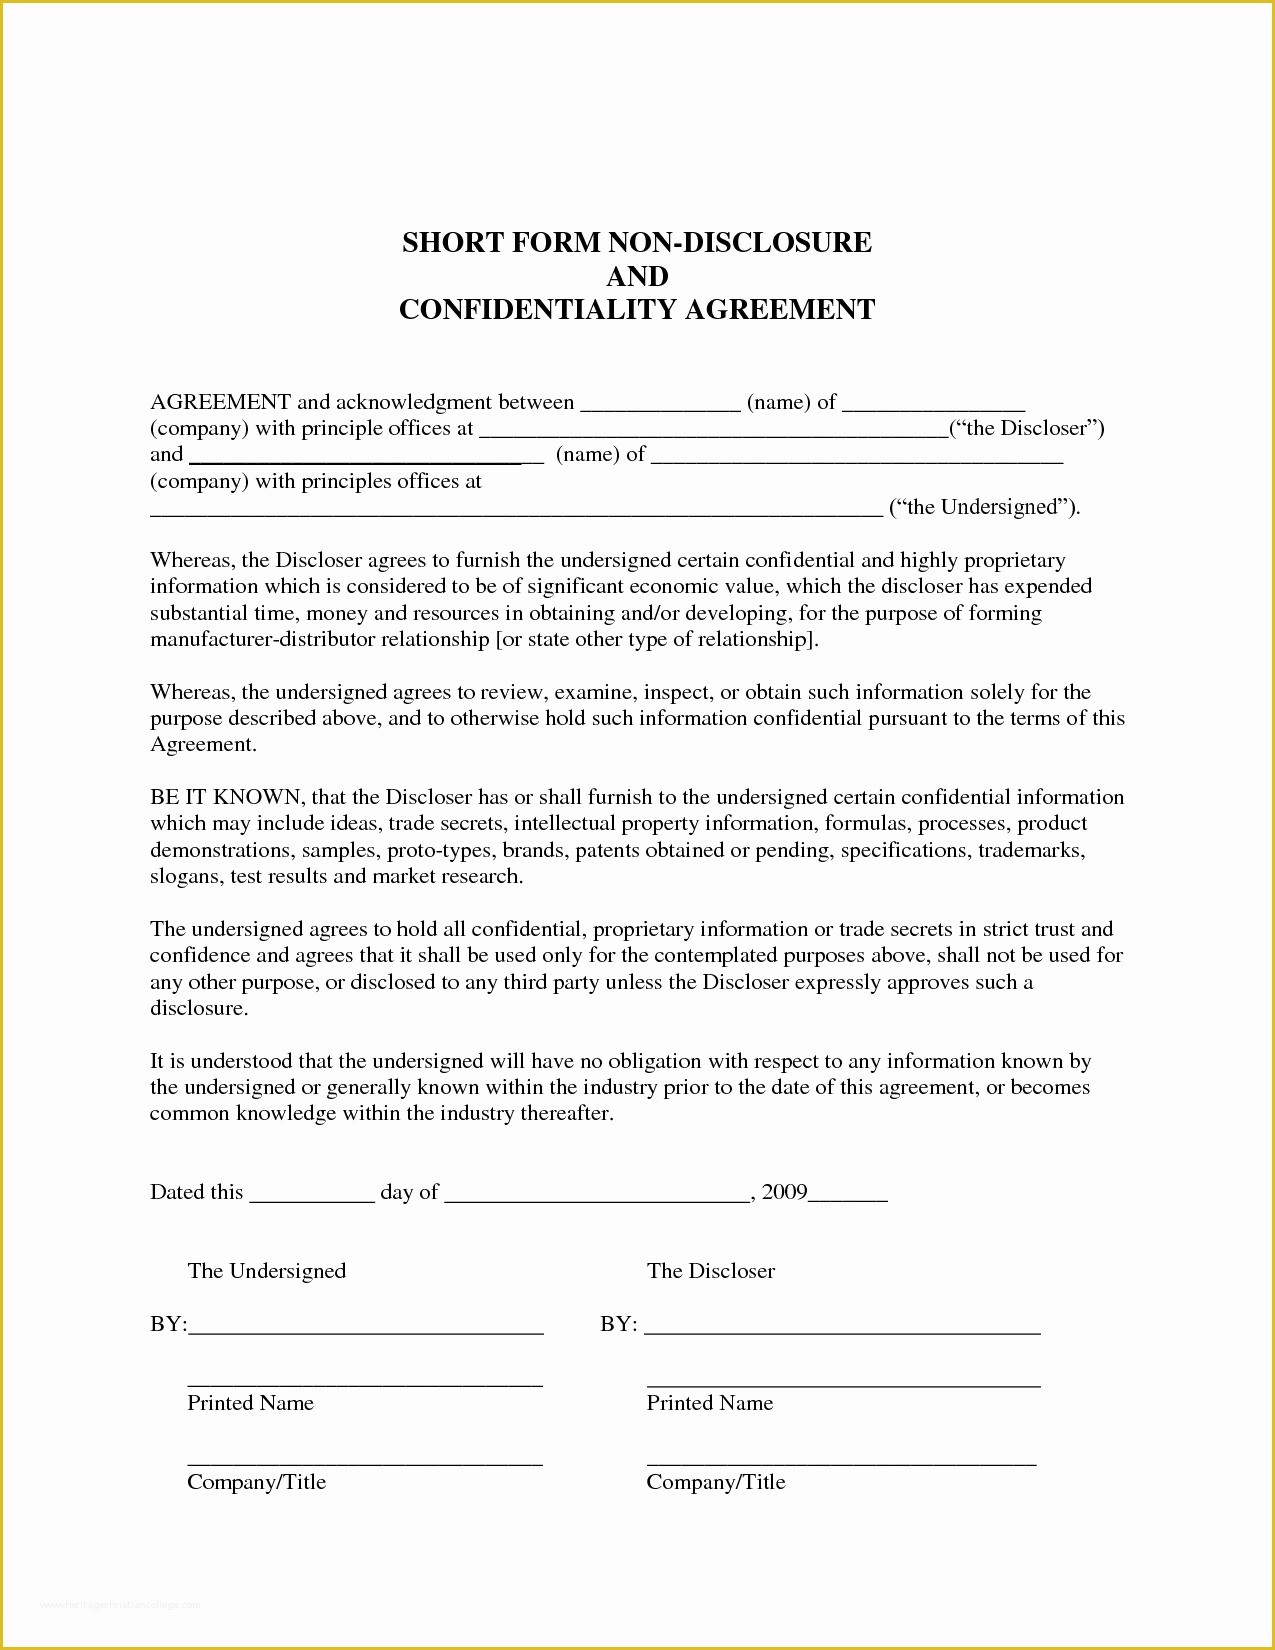 confidentiality-agreement-template-free-of-sample-non-disclosure